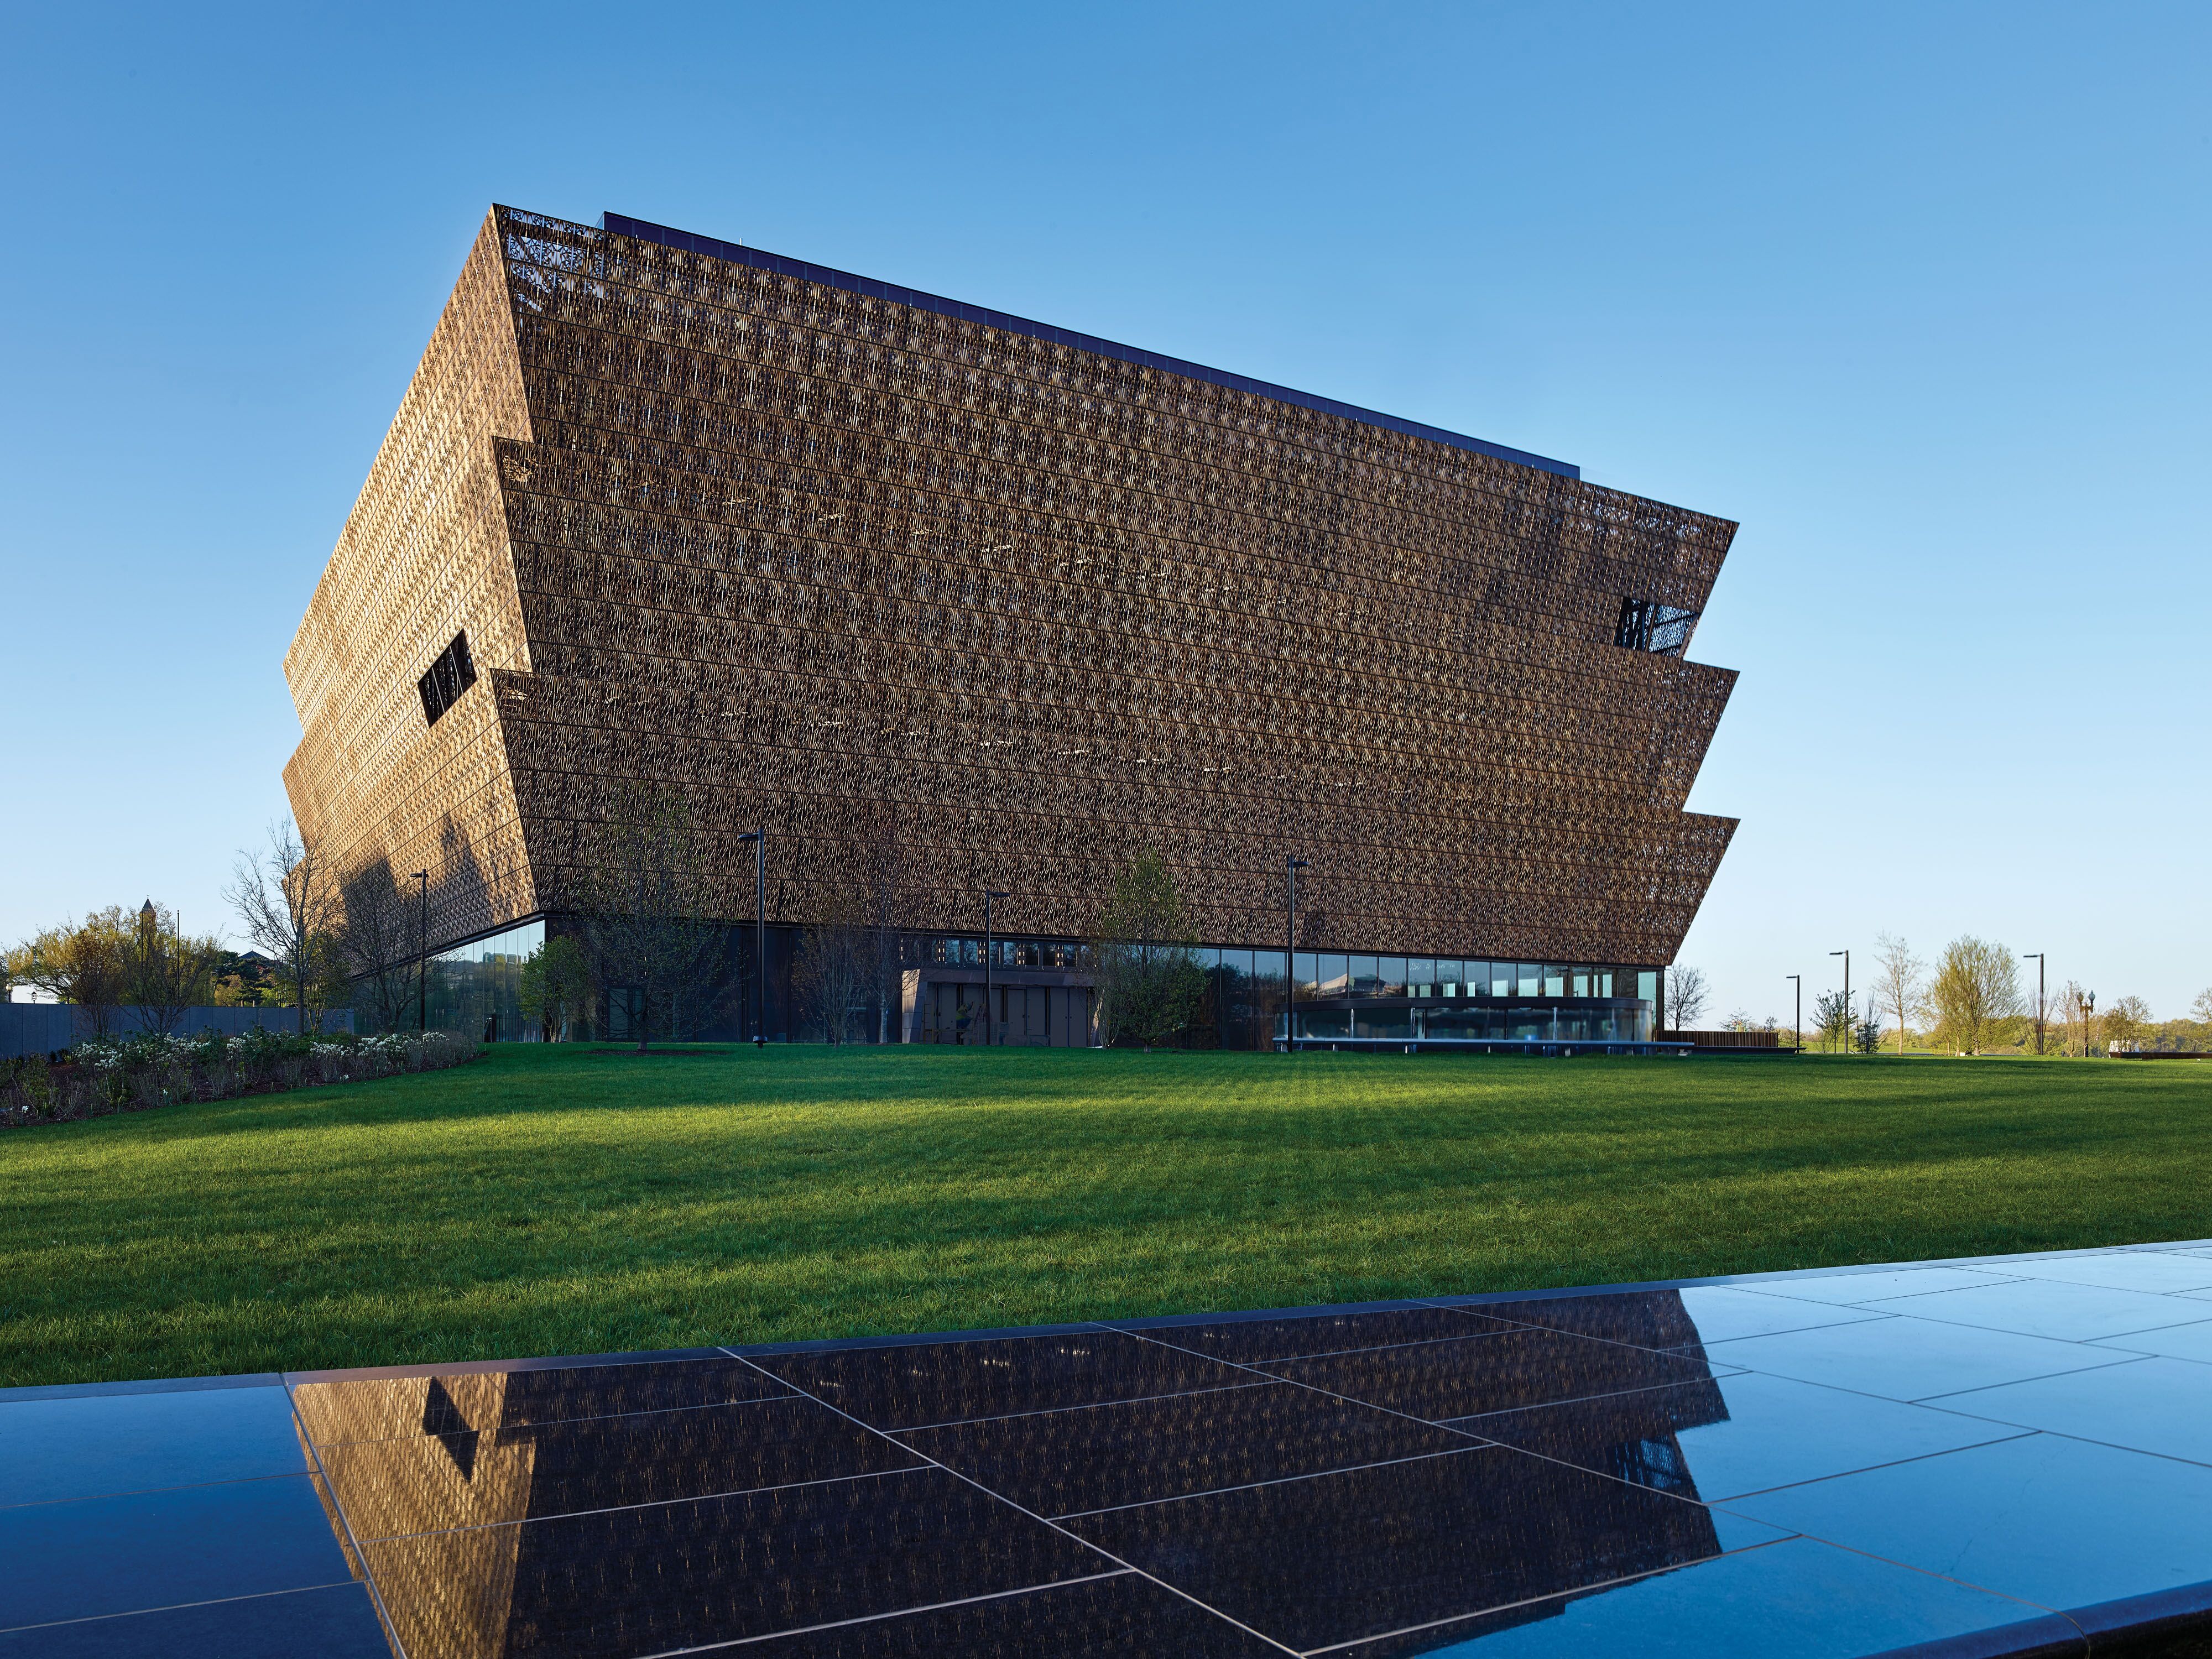 Image of the Museum of African American History and Culture. It is brown stricture depicting 3 levels with a reflection of it in the water.